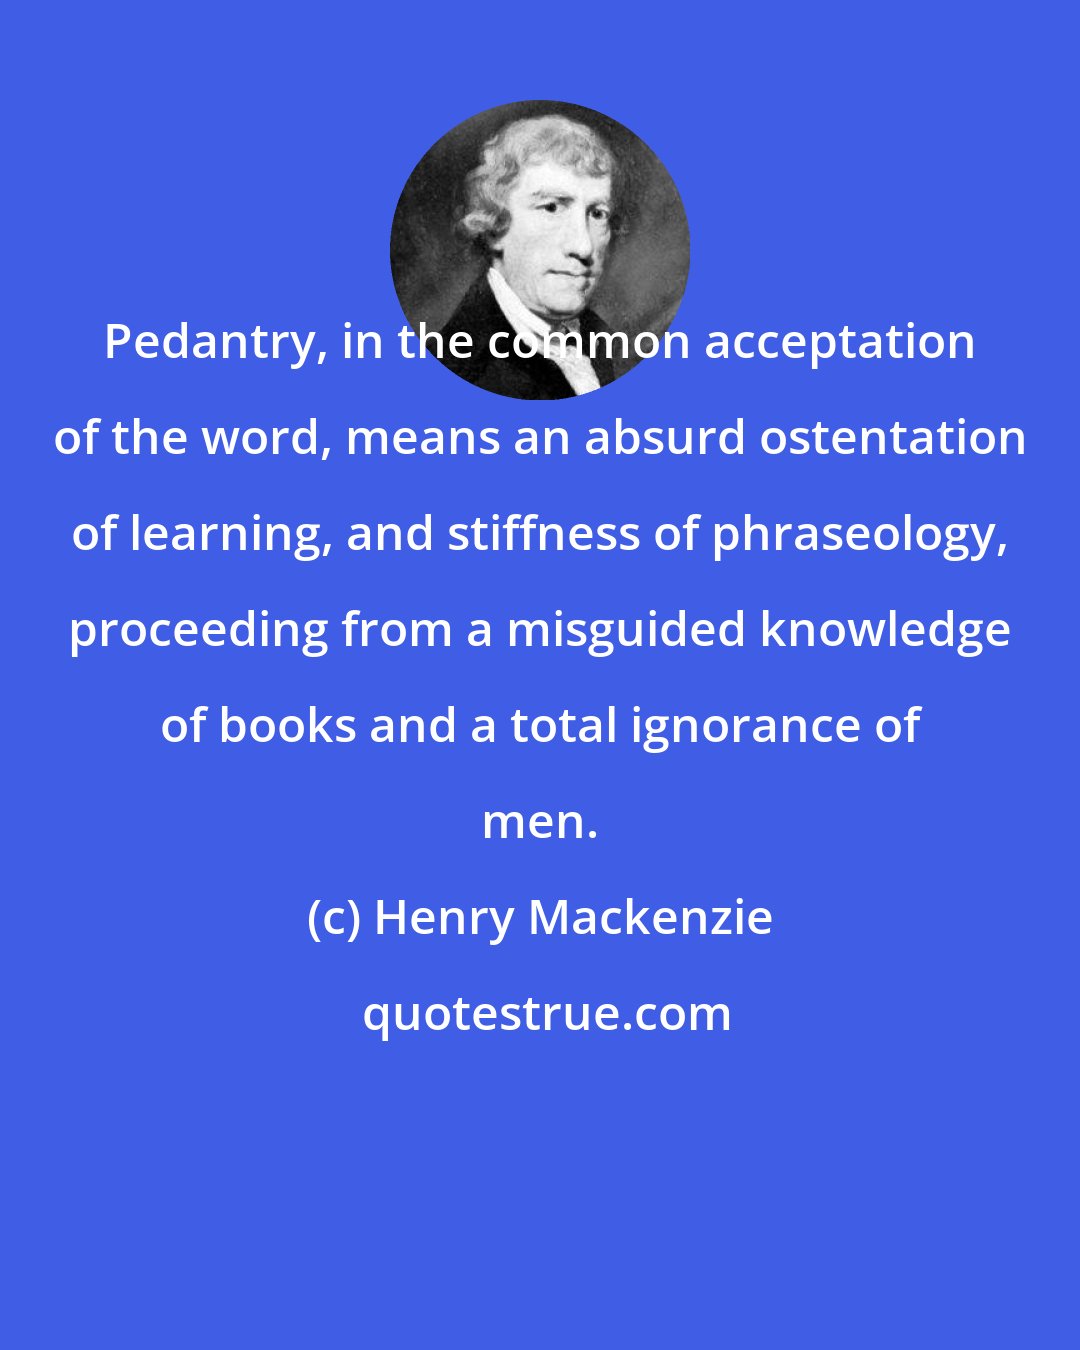 Henry Mackenzie: Pedantry, in the common acceptation of the word, means an absurd ostentation of learning, and stiffness of phraseology, proceeding from a misguided knowledge of books and a total ignorance of men.